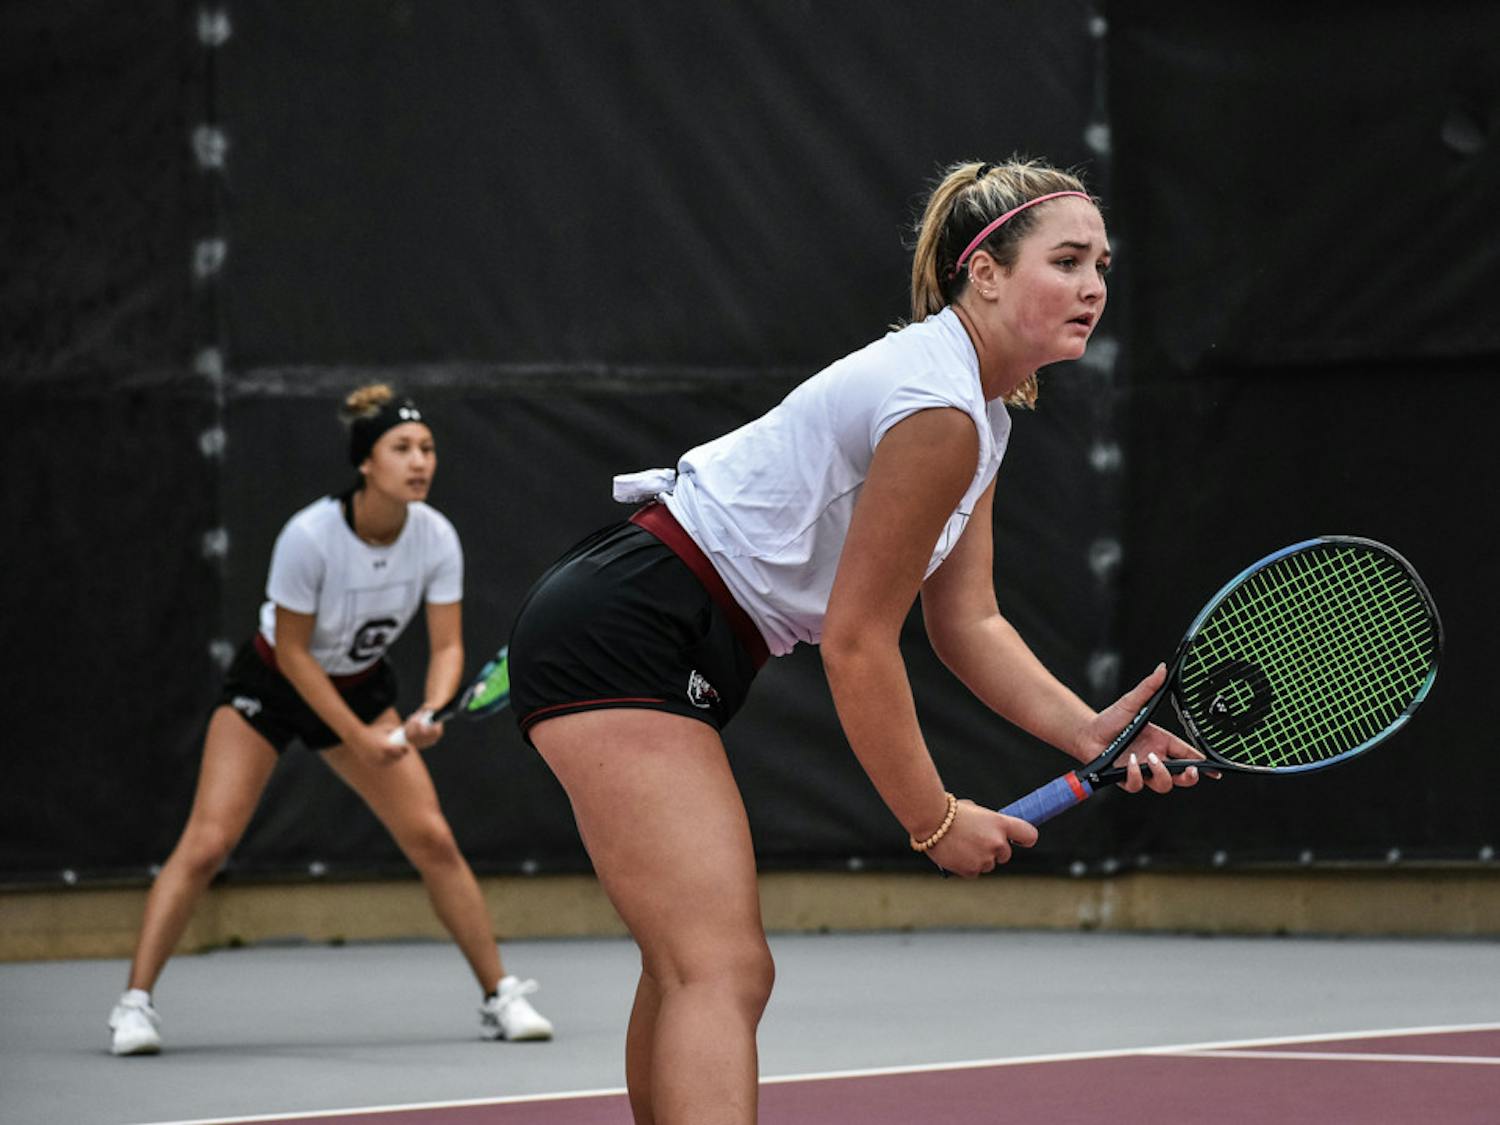 Freshman Alice Otis and sophomore Misa Malkin await a serve during during their doubles set against Kentucky on March 17, 2023. The Gamecock women’s tennis team won 4-3 in the match, but Otis and Malkin dropped the set 6-2.